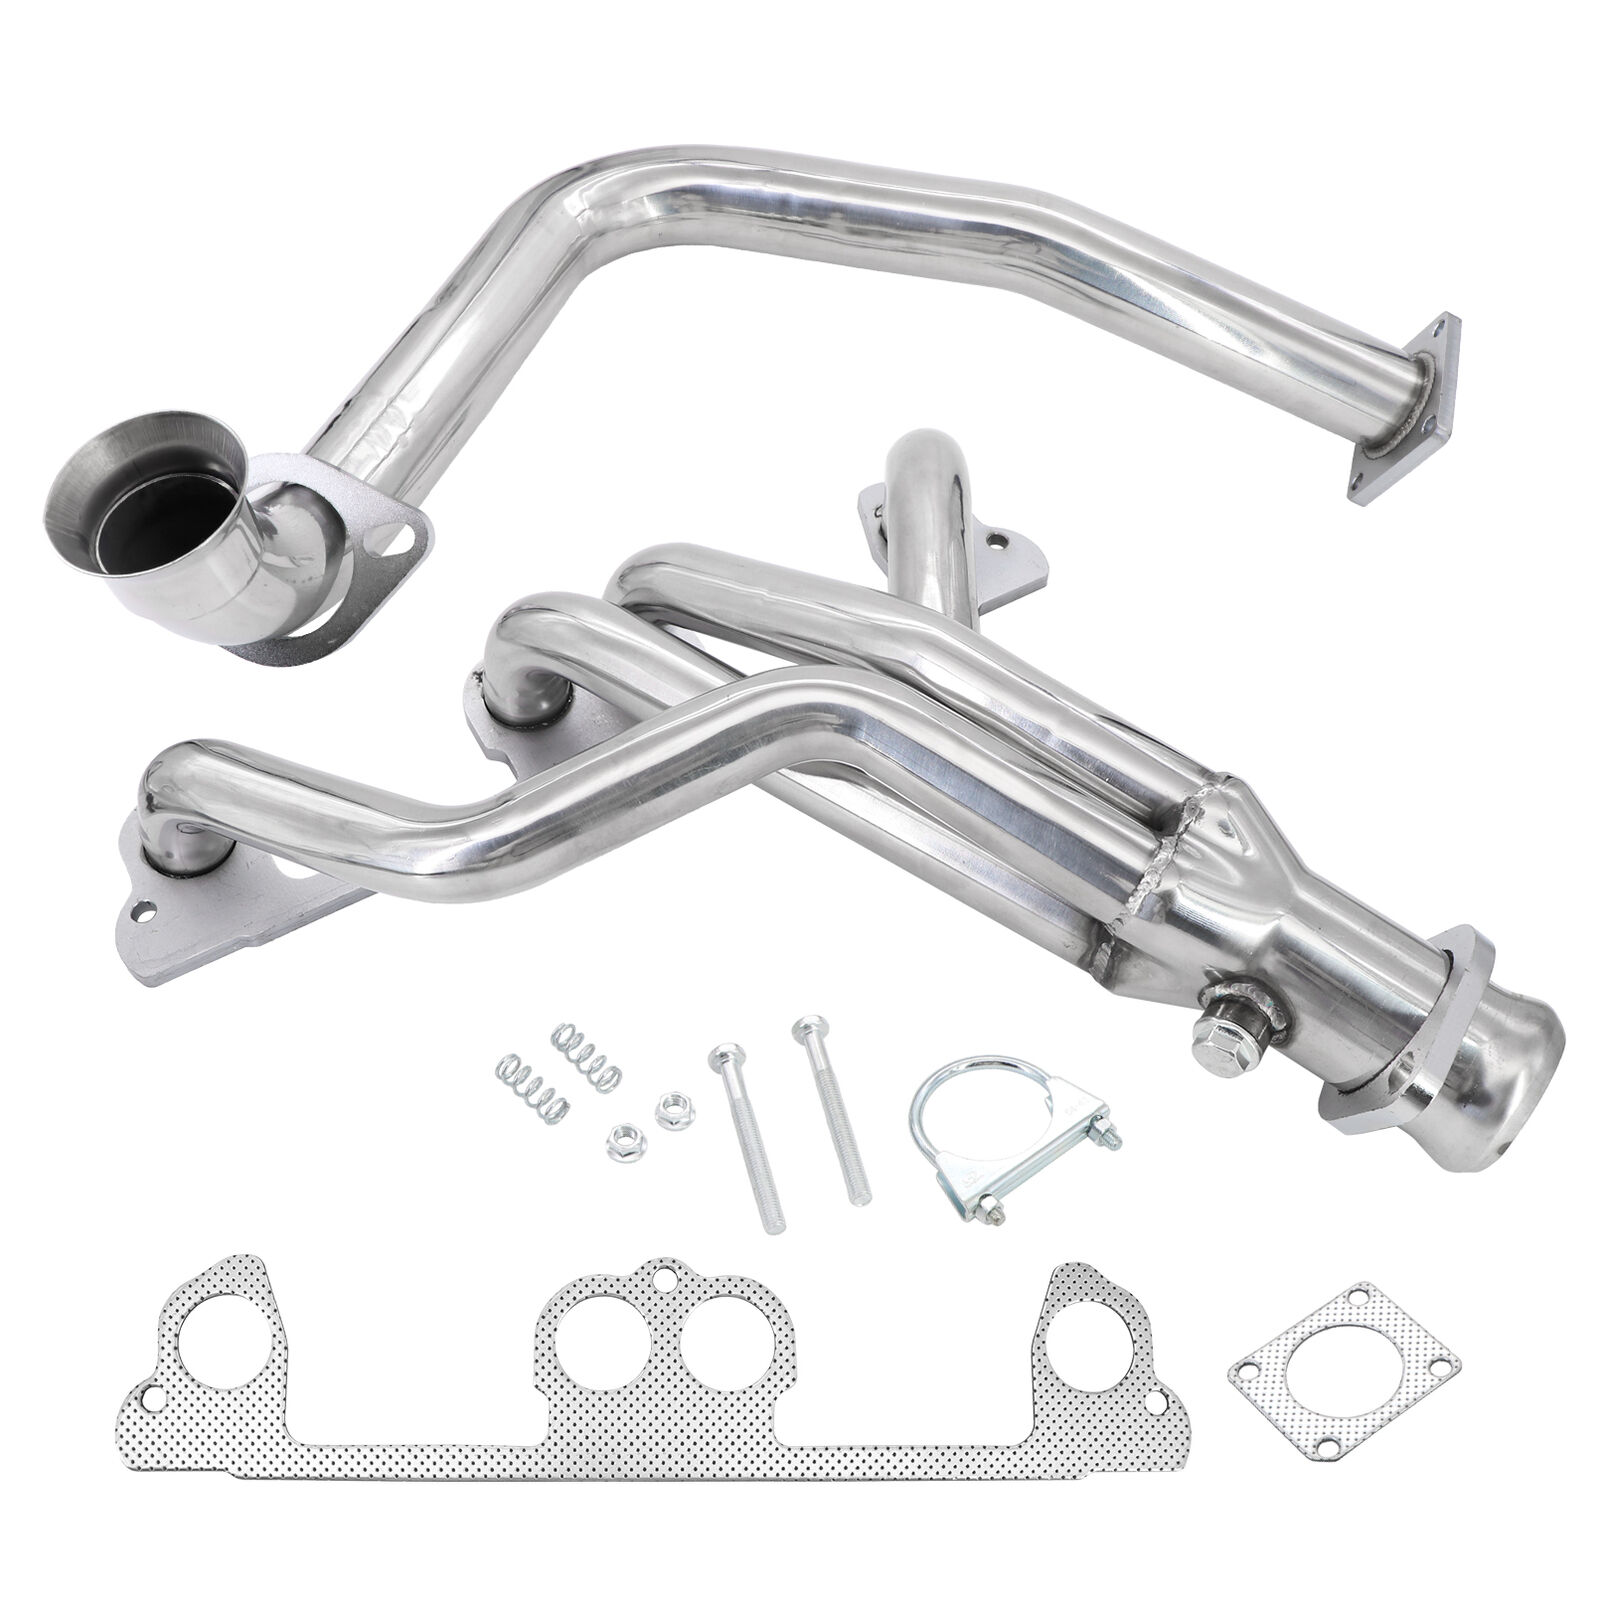 Stainless Steel Exhaust Header Manifold Fit for 1991-1995 2.5L Jeep Wrangler YJ